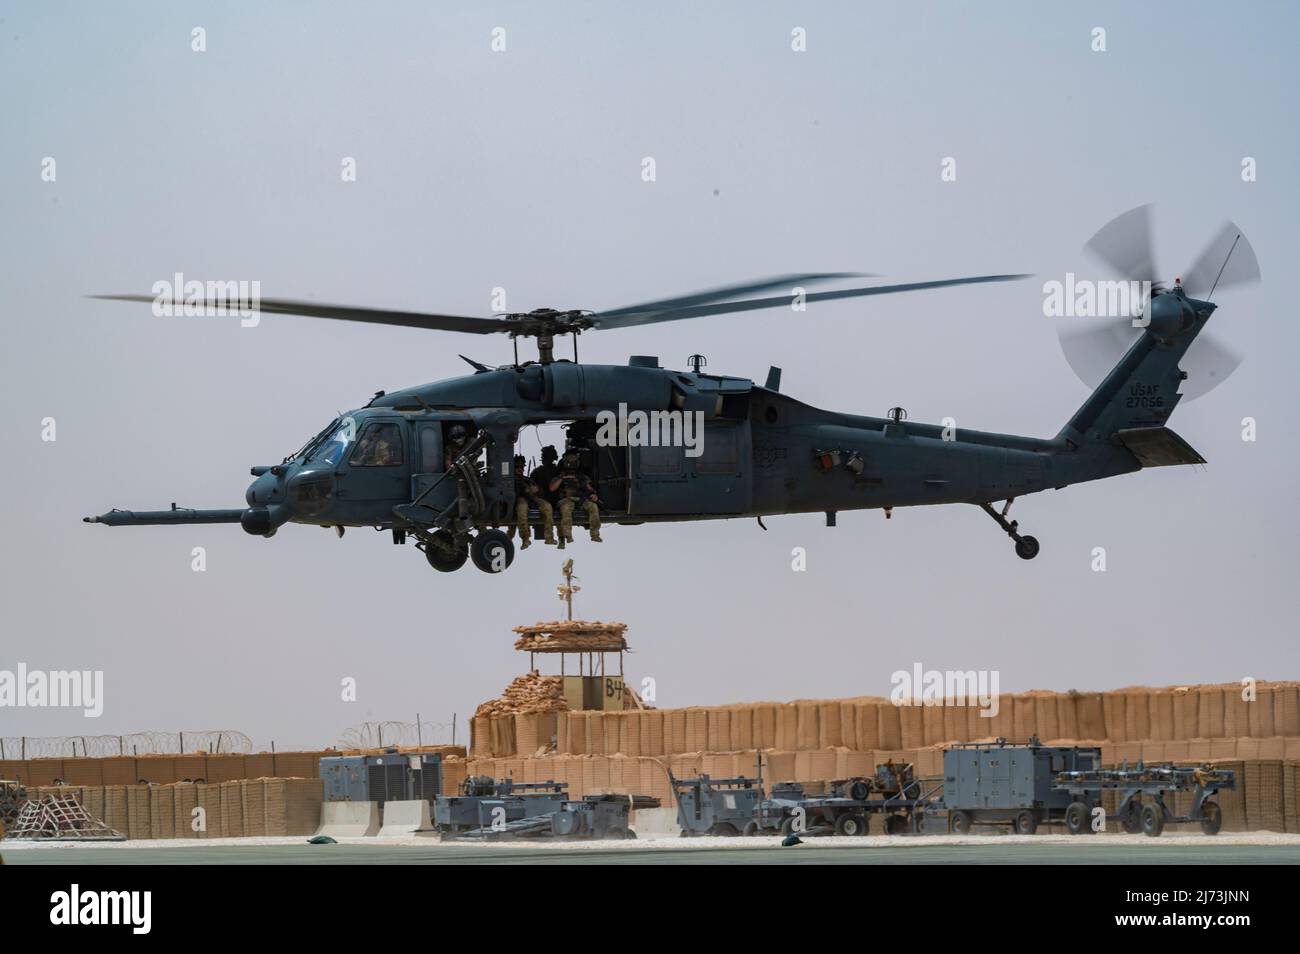 U.S. Air Force Pararescuemen, assigned to the 52nd Expeditionary Rescue Squadron, take off in an HH-60 Pave Hawk, assigned to the 46th ERQSs, for a combat search and rescue exercise at an undisclosed location, April 28, 2022. Air Forces Central Command's ERQSs are organized, trained, equipped, and postured to conduct full spectrum personnel recovery to include both conventional and unconventional combat rescue operations within the Central Command theater of operations. (U.S. Air Force photo by Staff Sgt. Christian Sullivan) Stock Photo